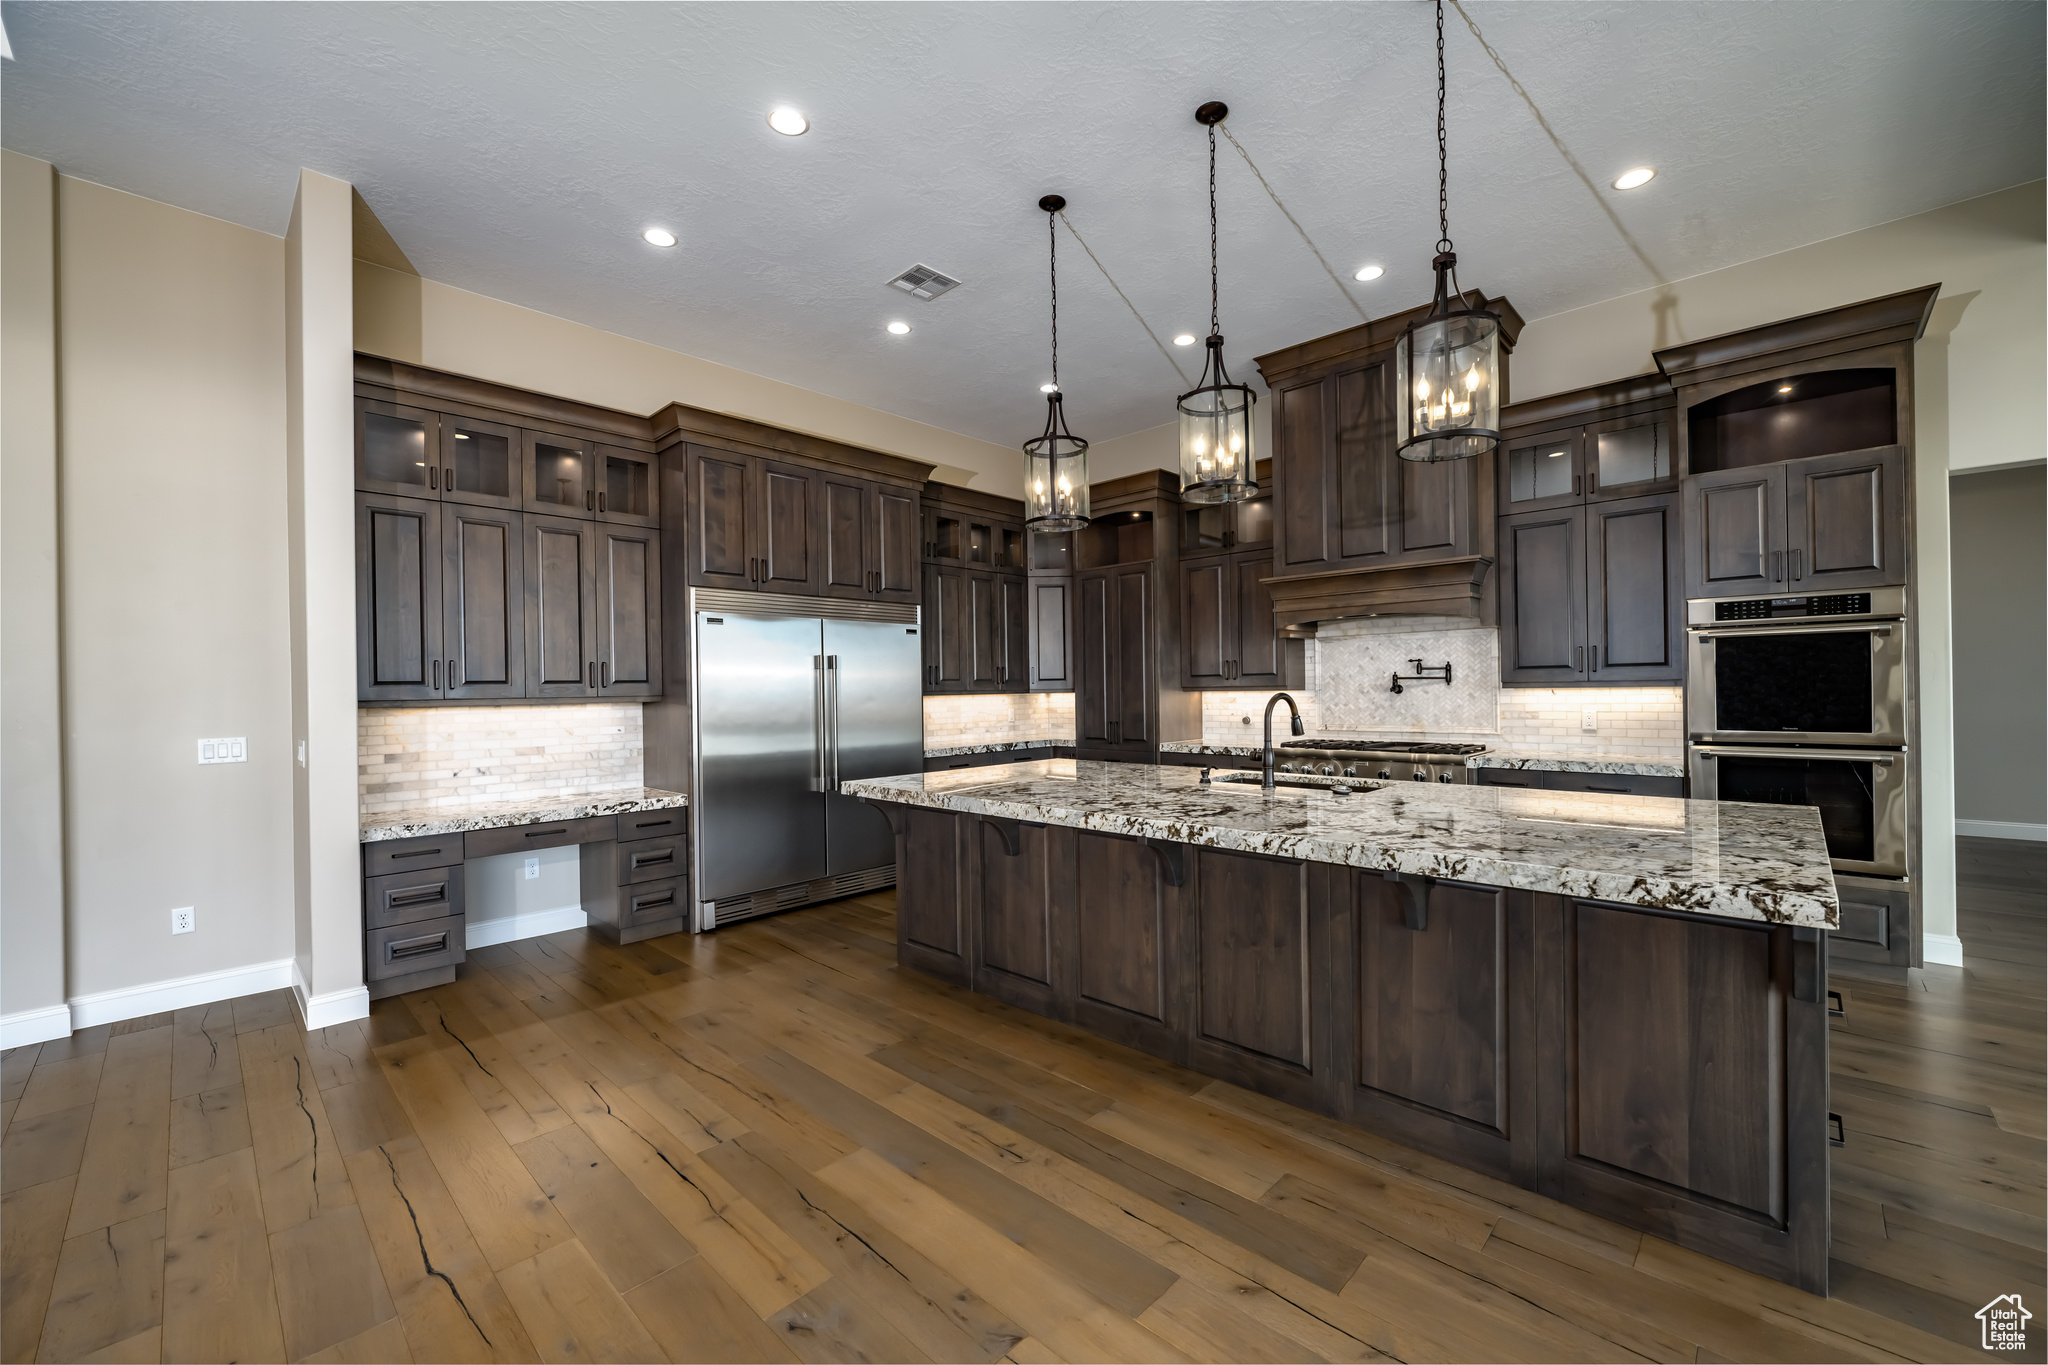 Kitchen with appliances with stainless steel finishes, backsplash, dark wood-type flooring, decorative light fixtures, and a kitchen island with sink